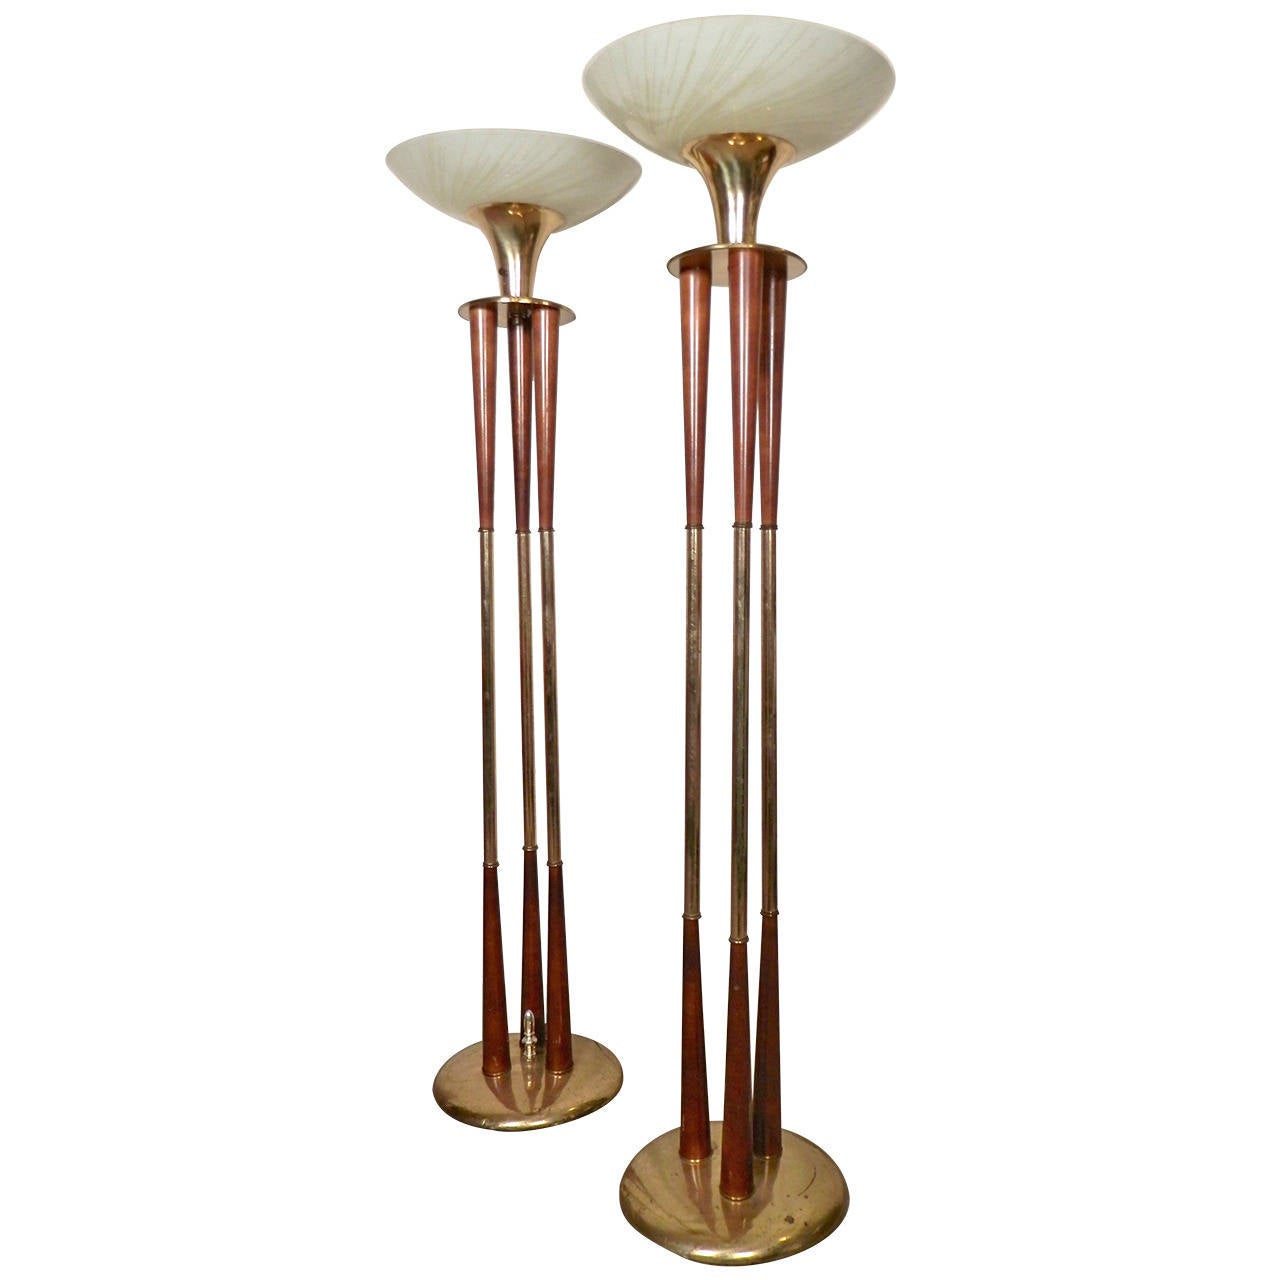 Pair Mid-Century Torchiere Lamps For Sale at 1stdibs